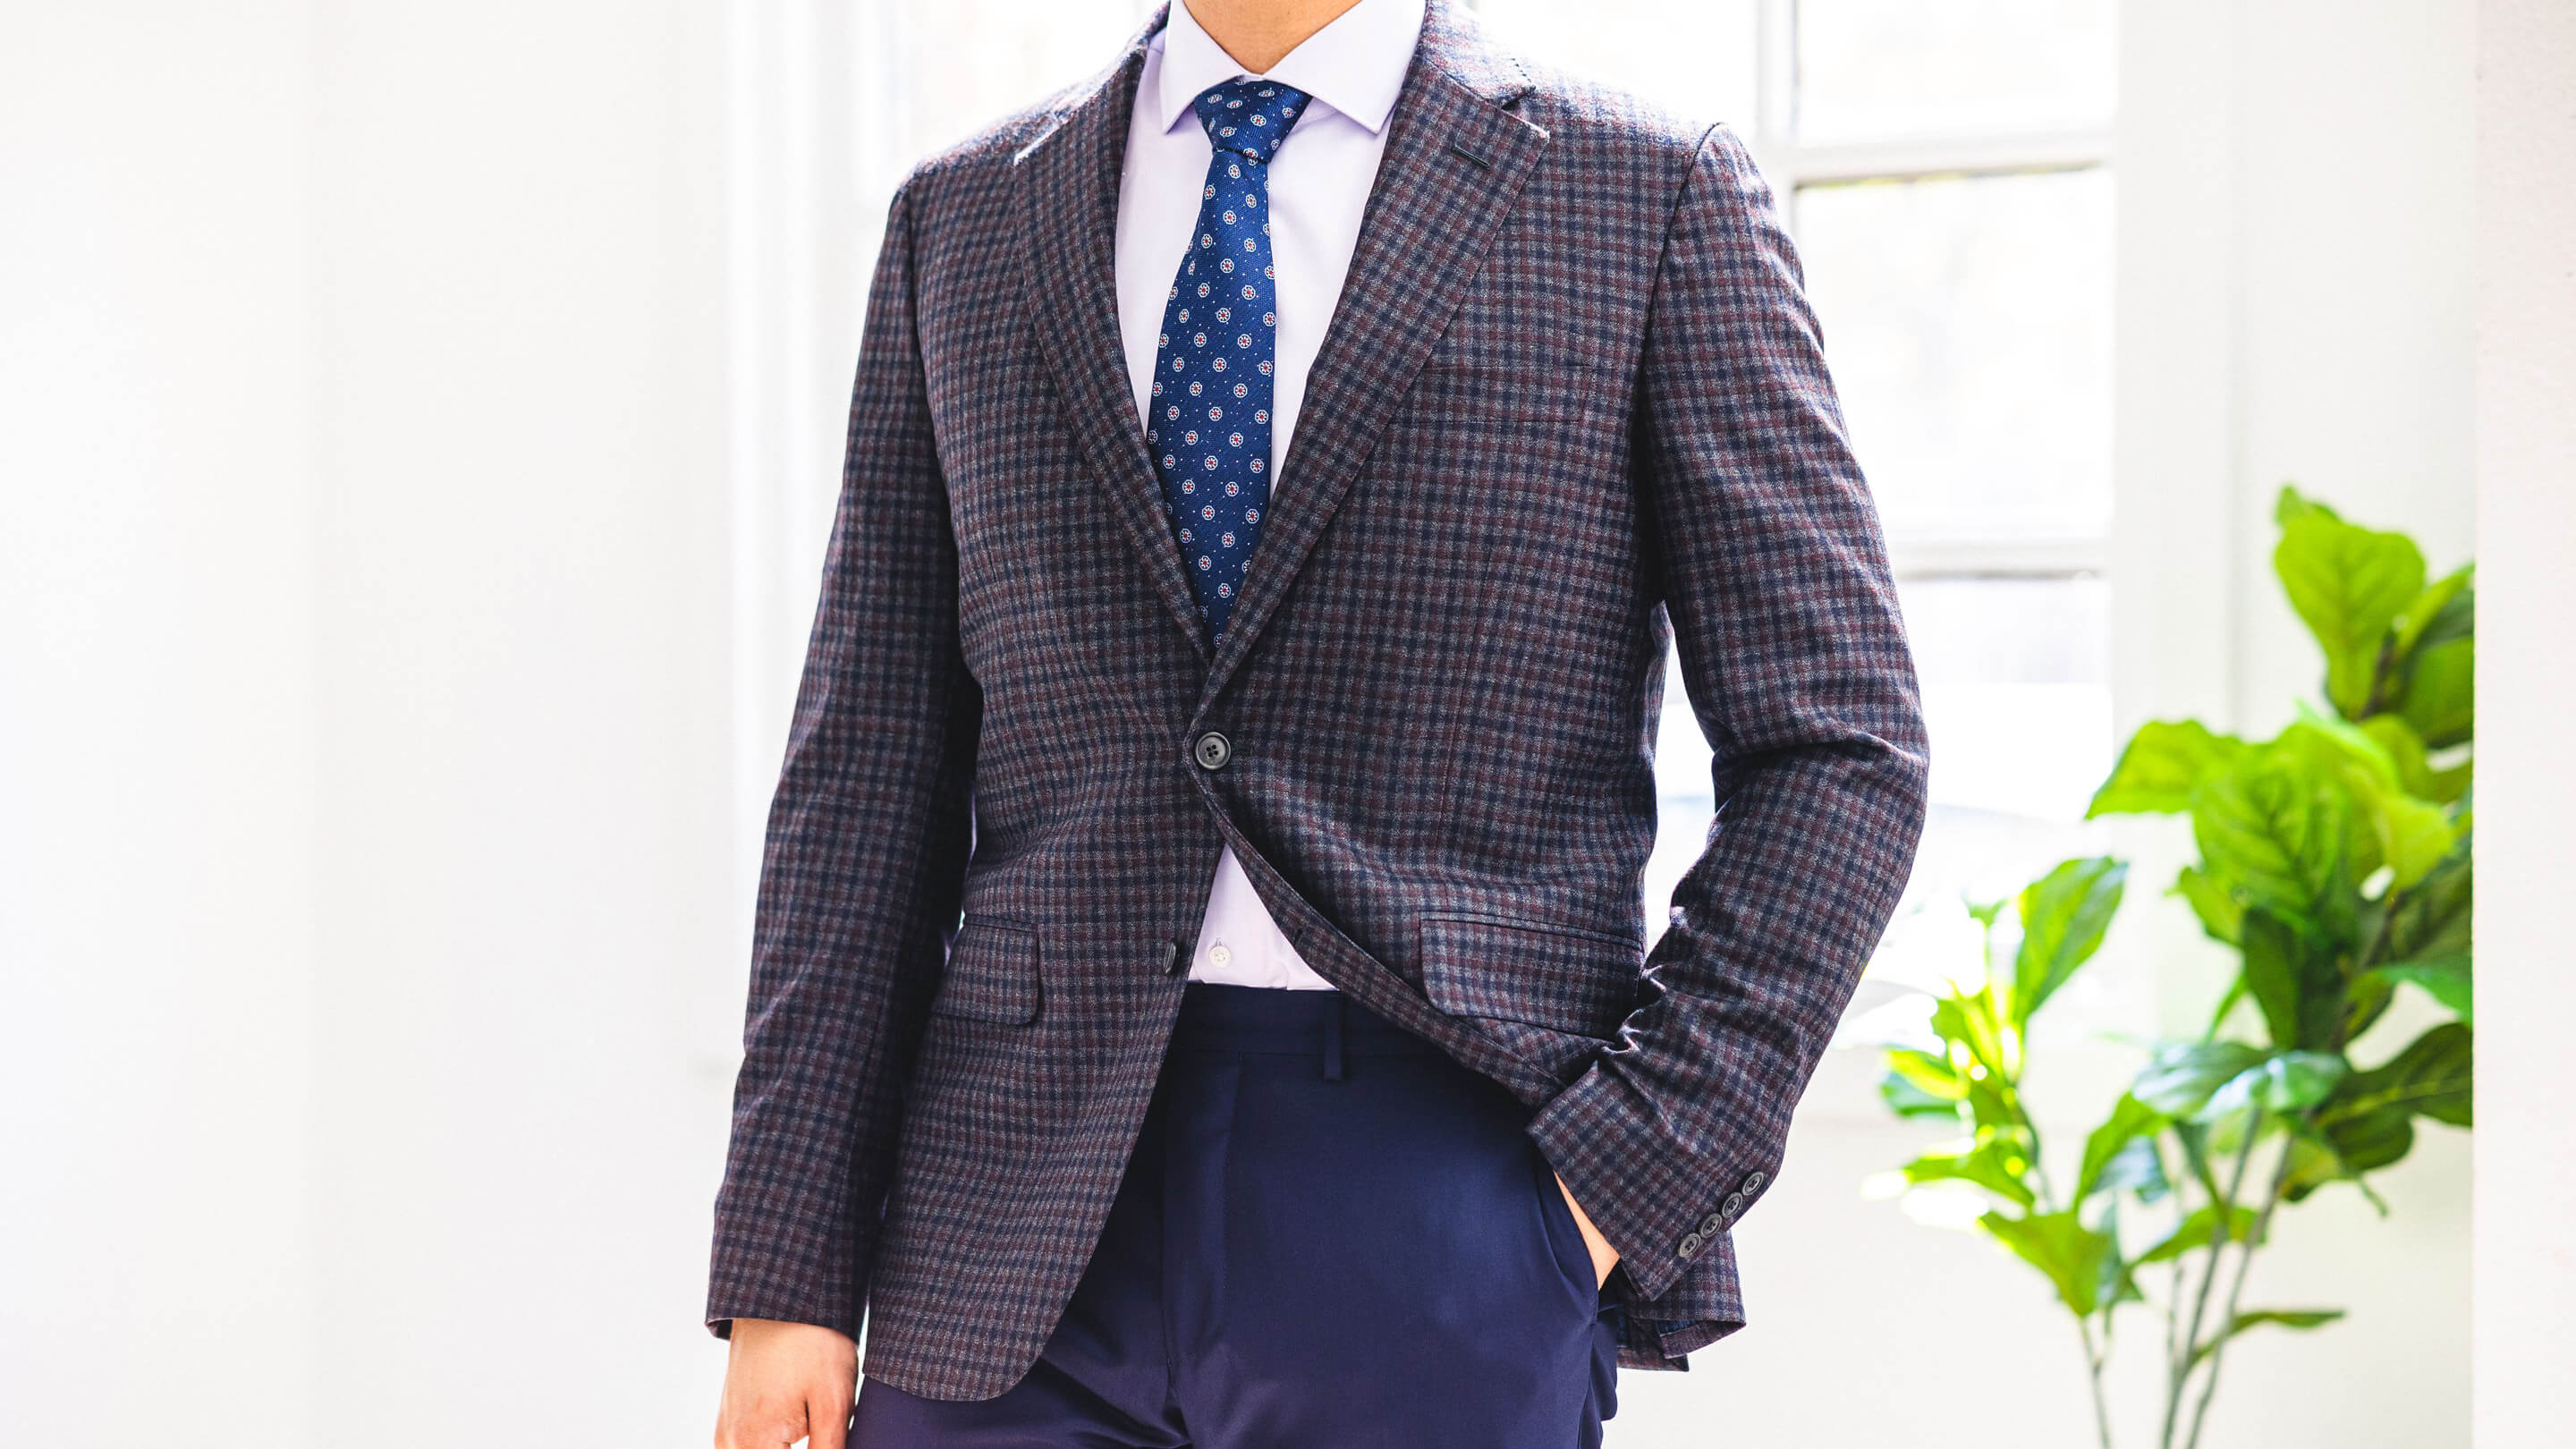 Blazers vs. Sport Coats  What's the Difference? – Anatoly & Sons